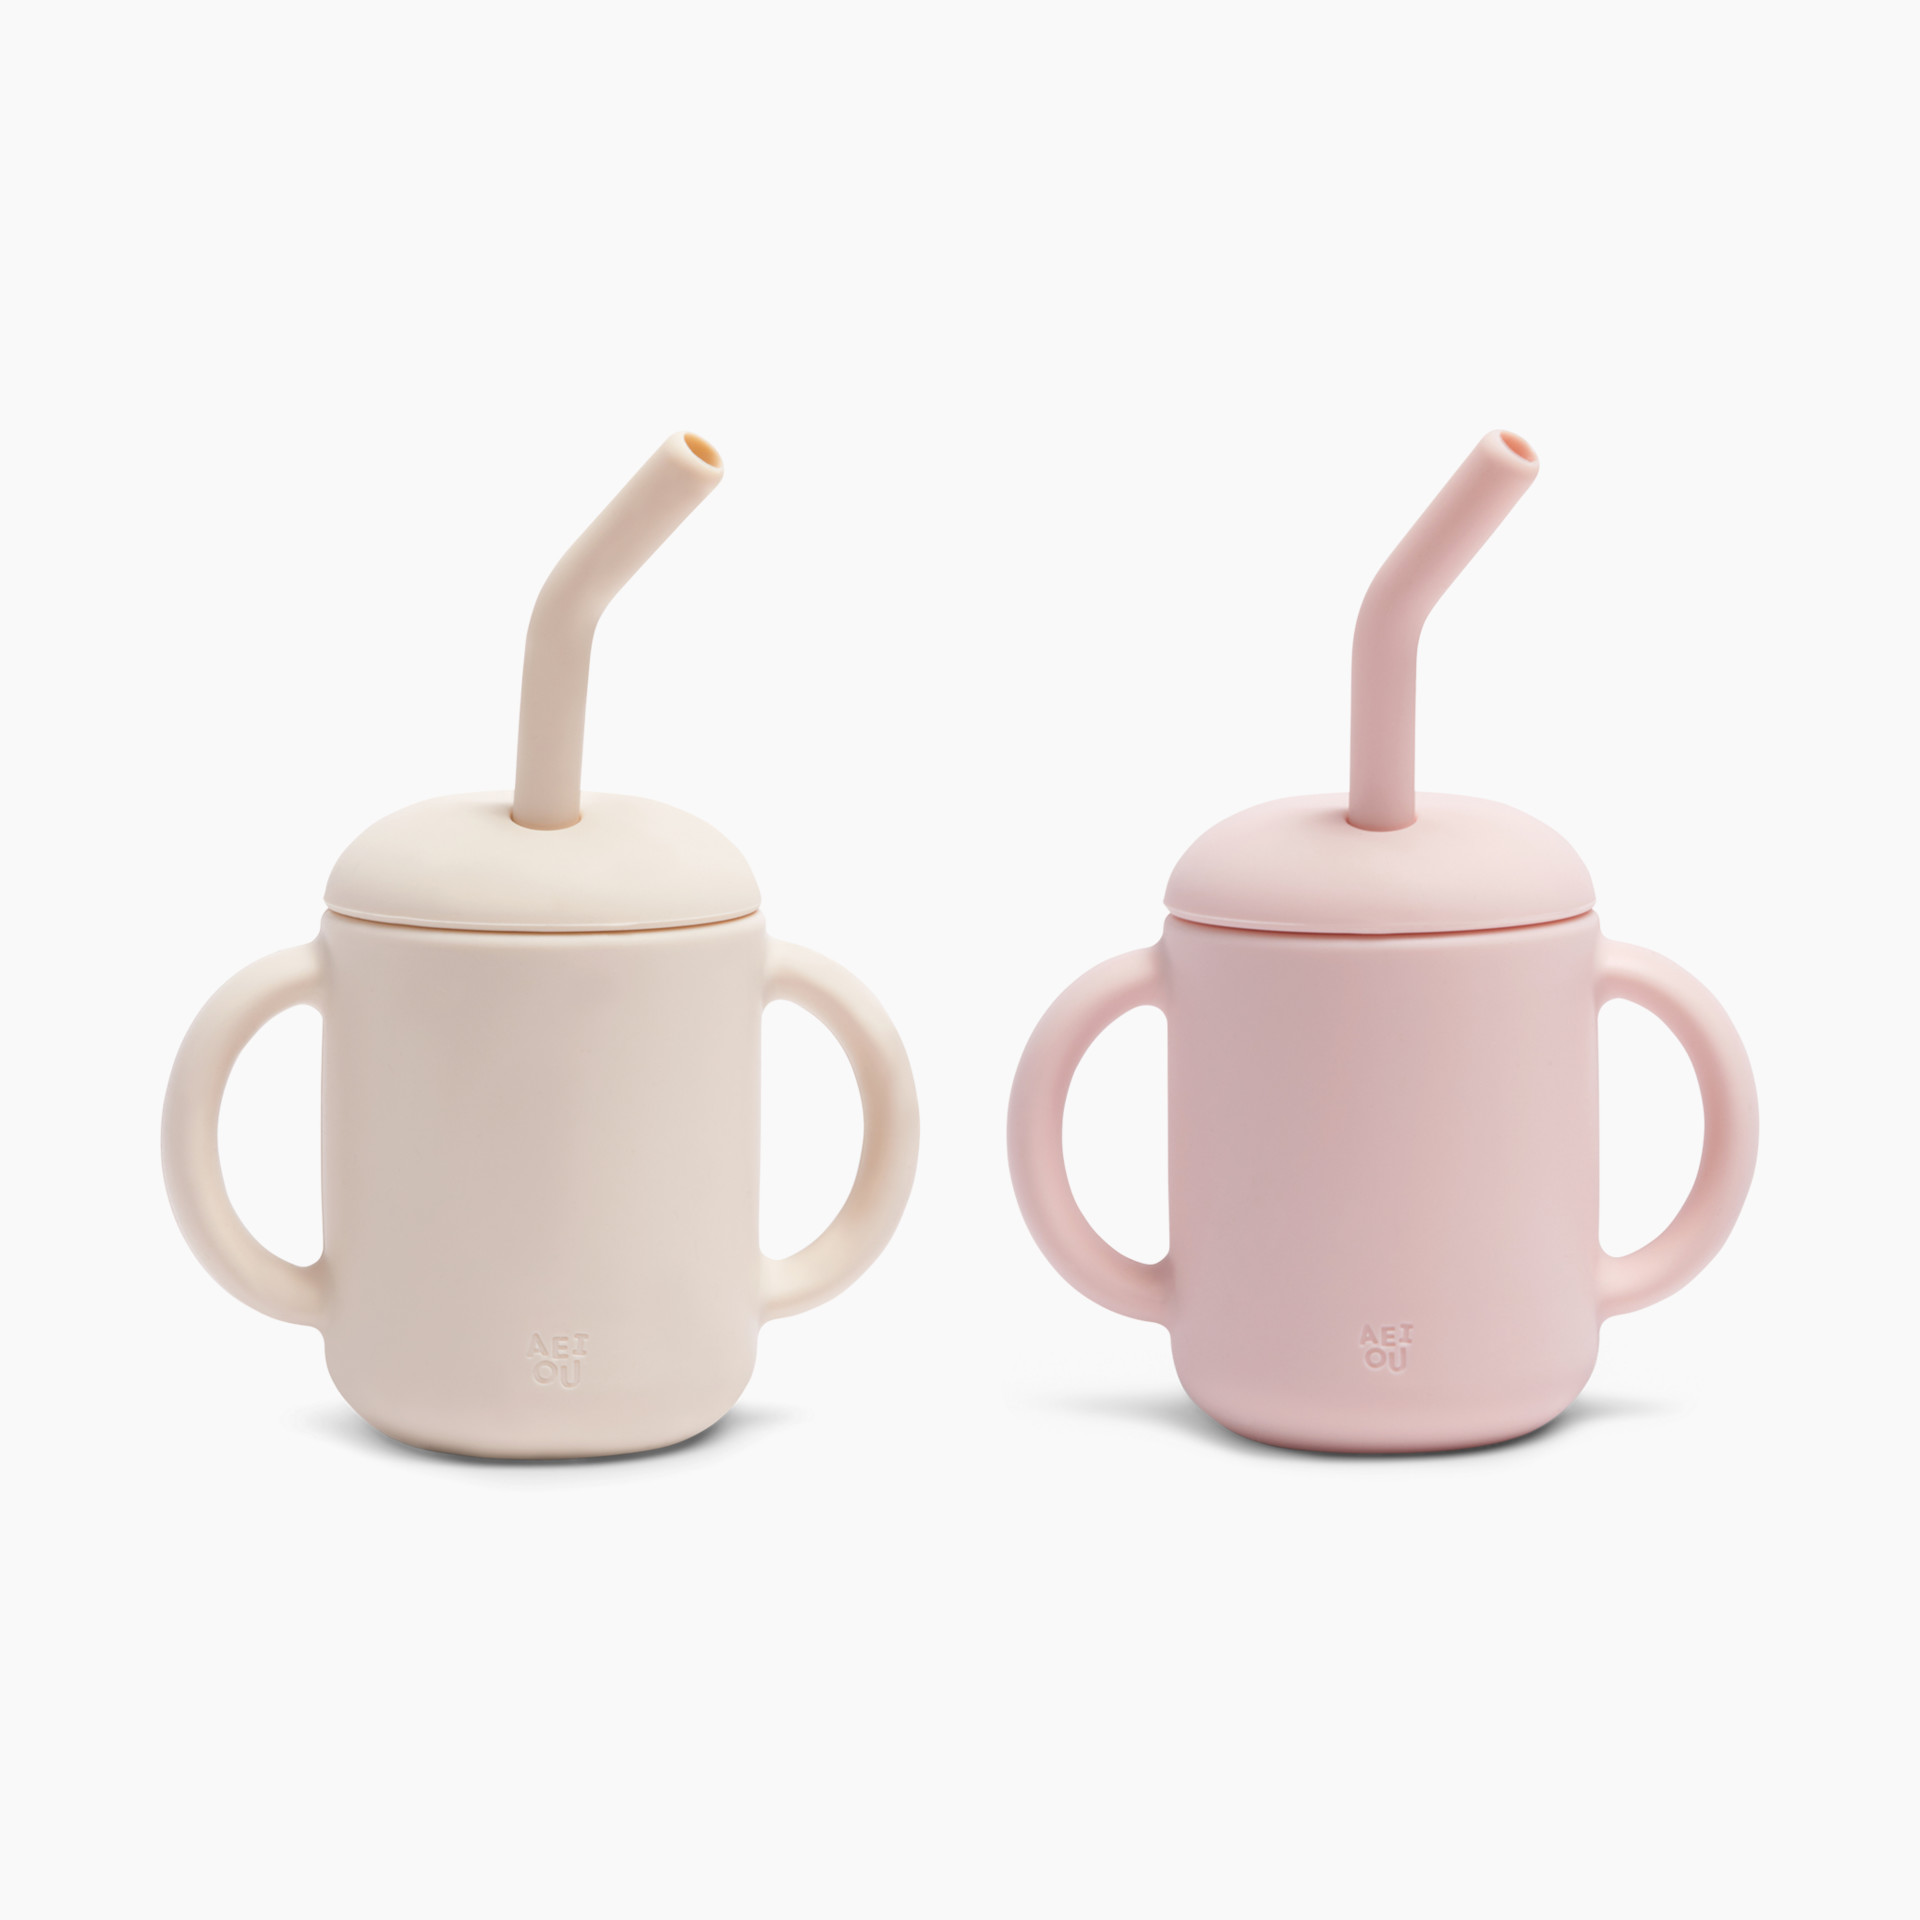 AEIOU Sippy Cup with Straw in Clay Size 4.2 x 2.4 x 5.5